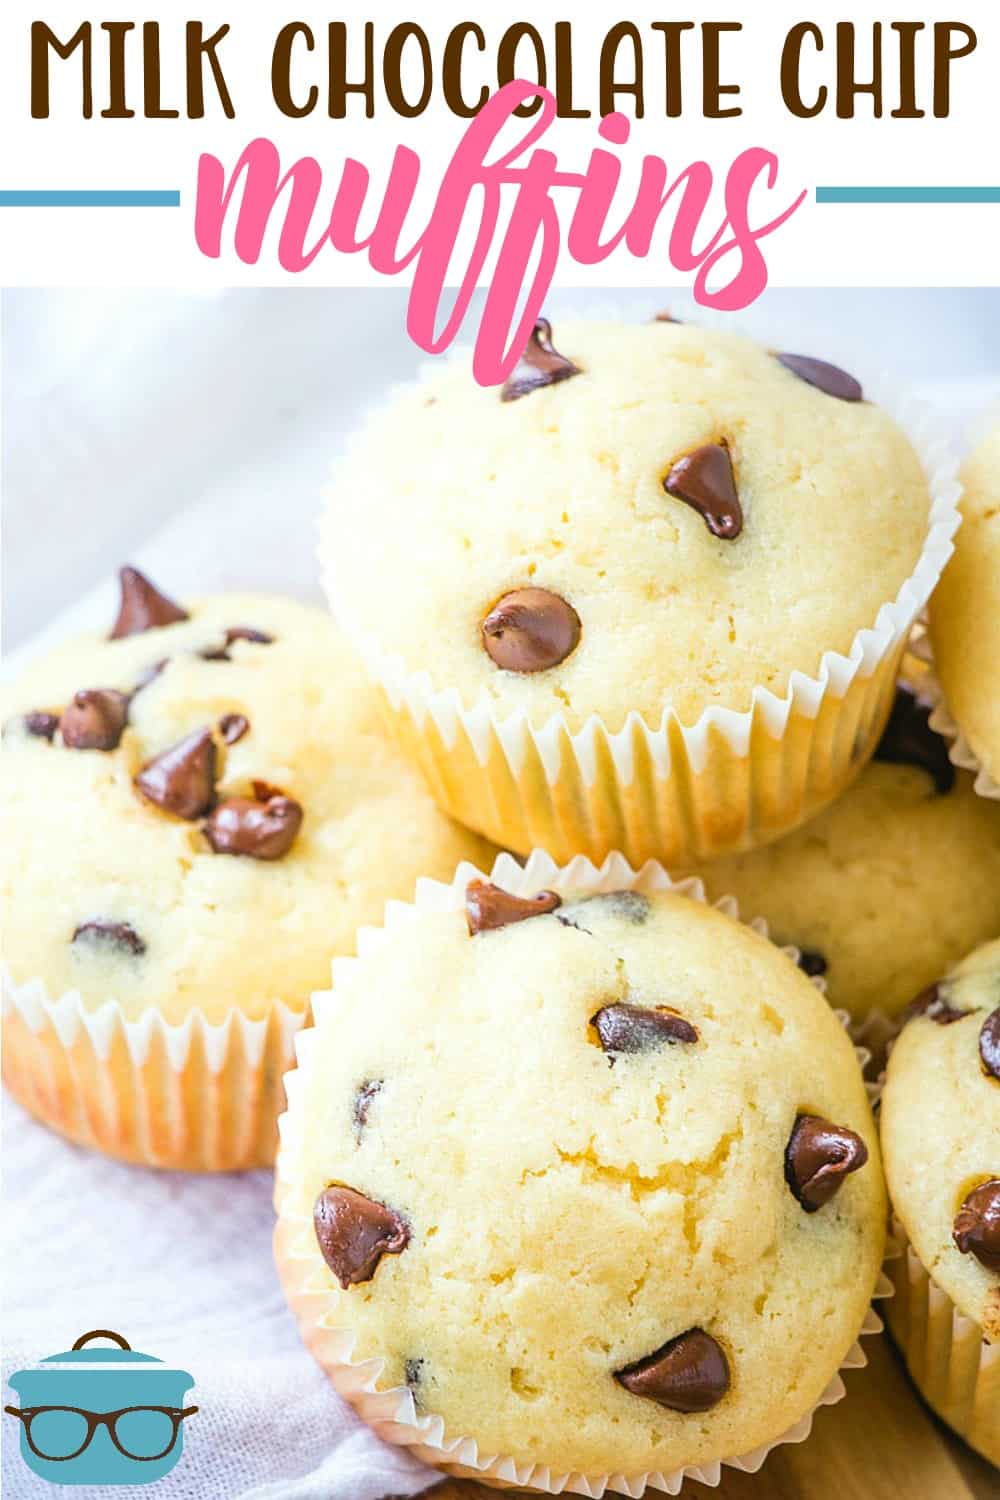 The Yummiest Homemade Milk Chocolate Chip Muffins recipe from The Country Cook. Muffins showed stacked on a plate.